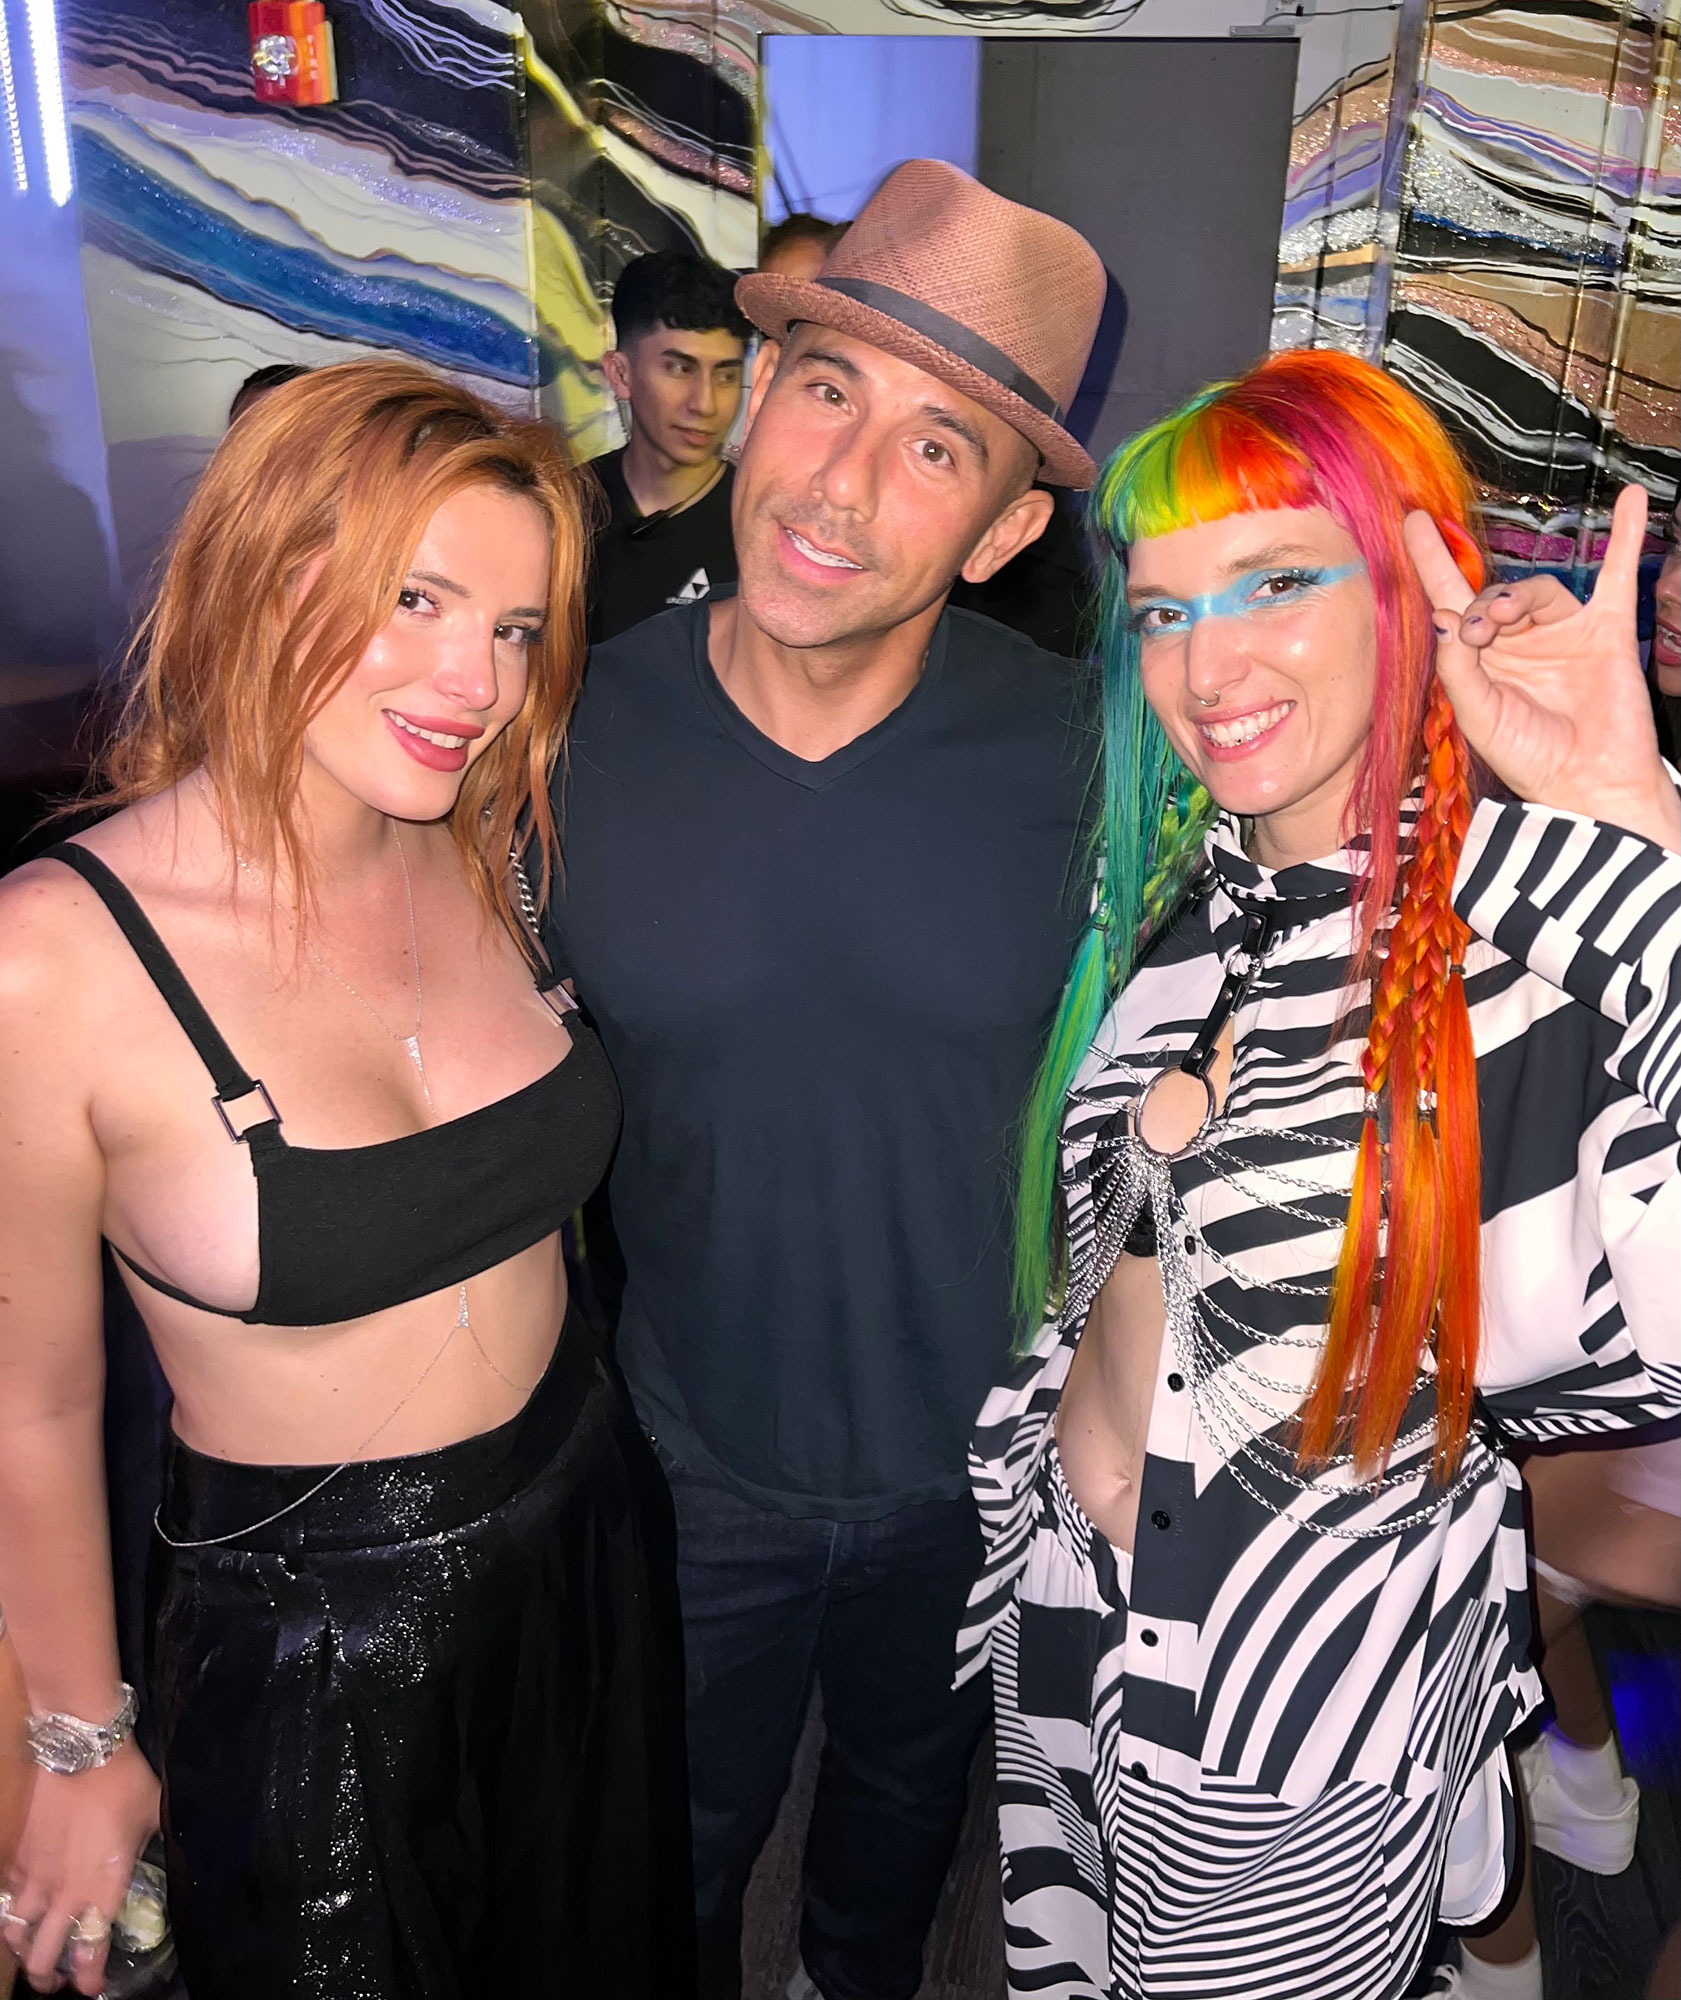 Bella Thorne, sister Dani Thorne (performed at Lollapalooza) and Billy Dec at The Underground in Chicago, IL.